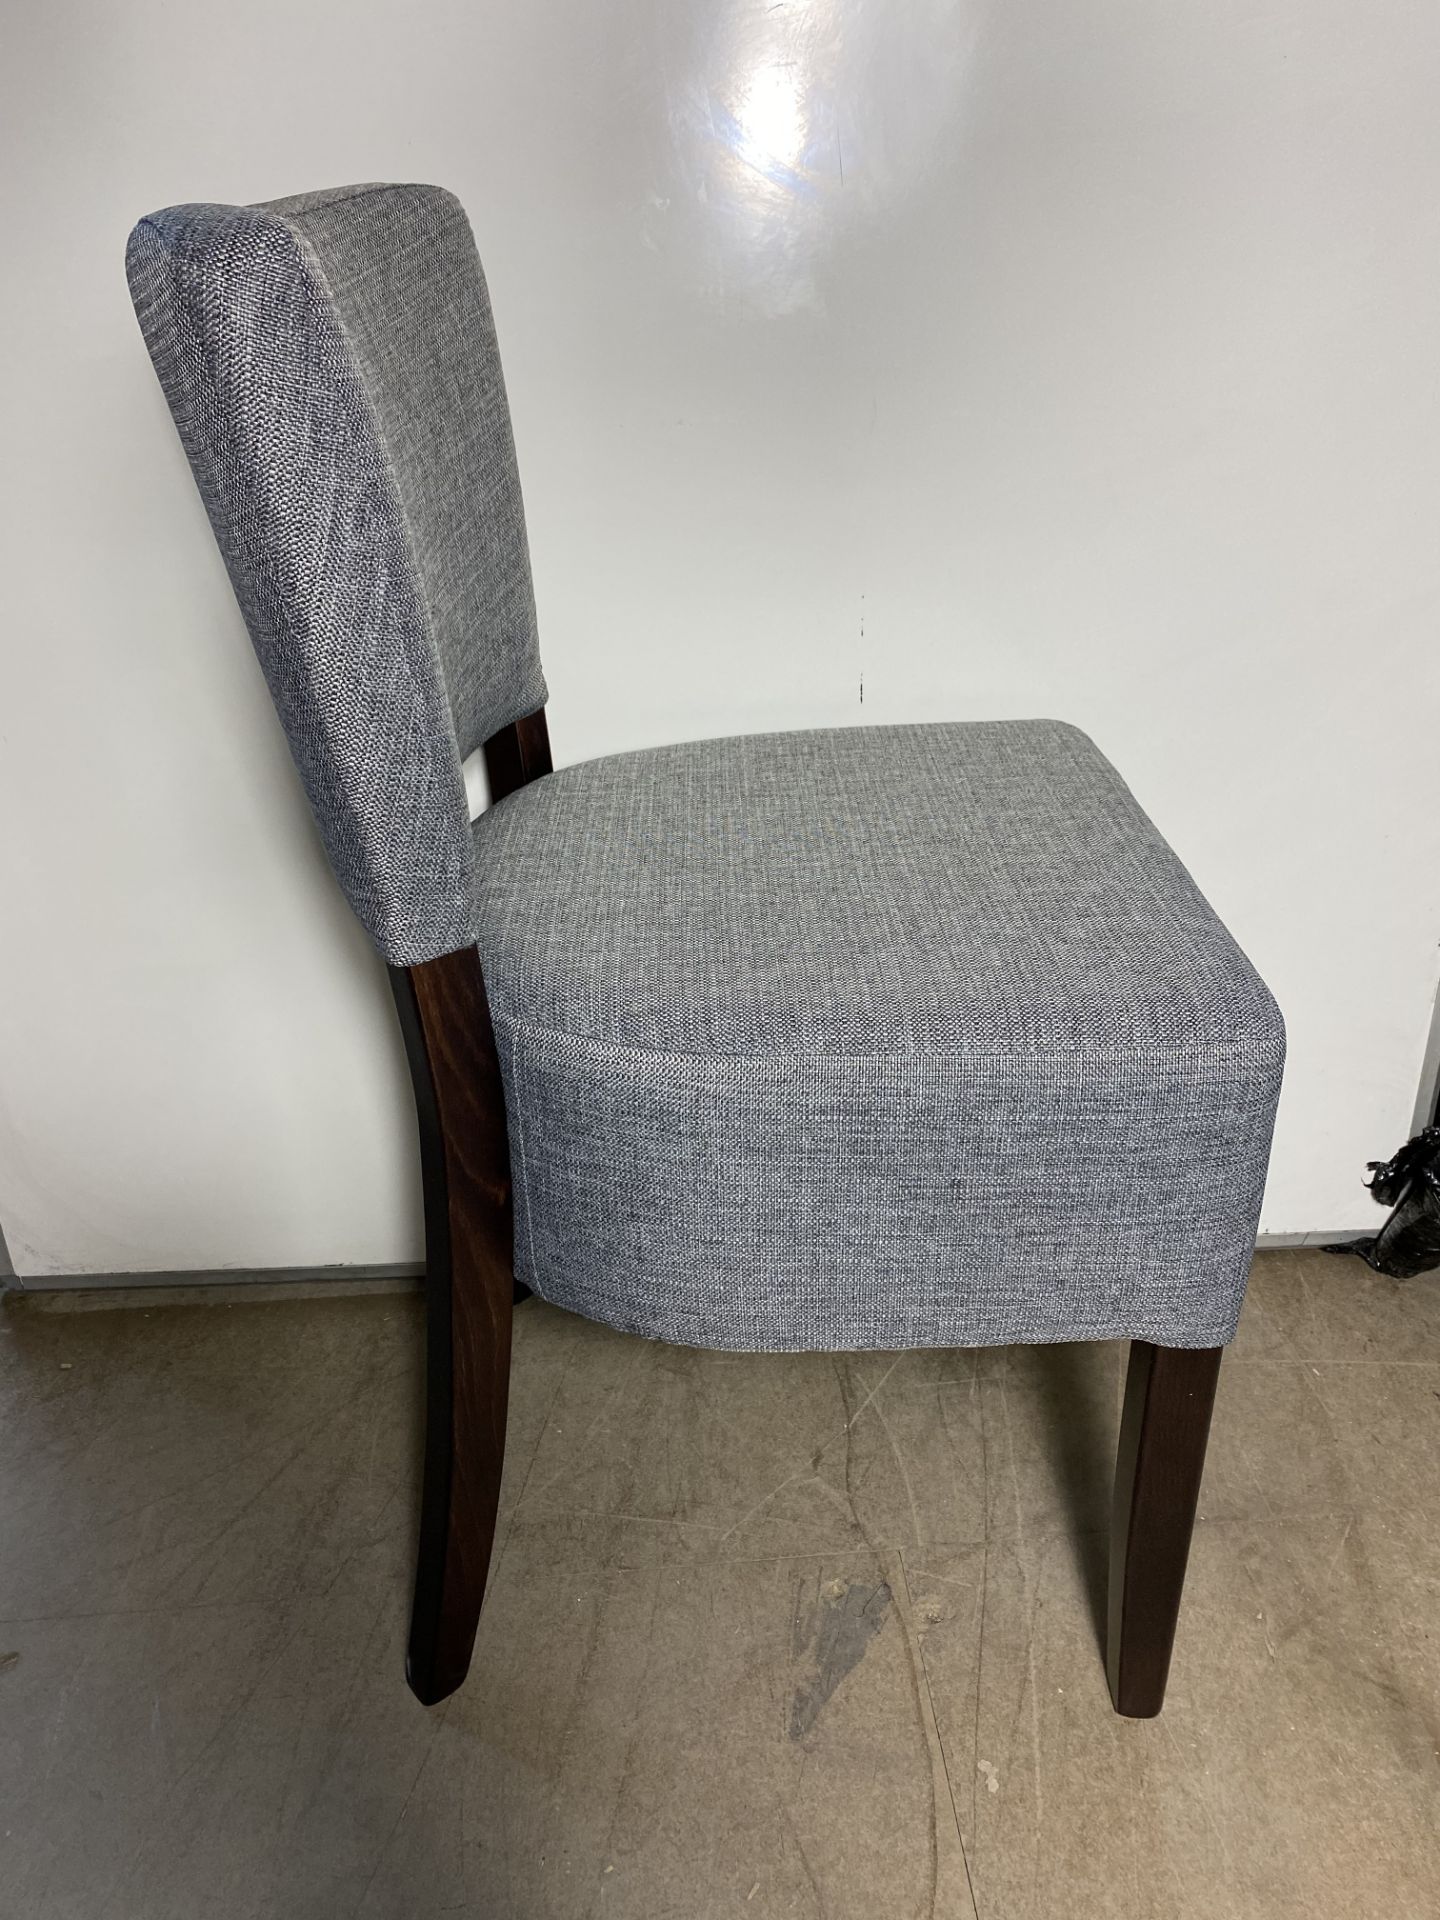 4 x Next Memphis Side Chairs | 05TN04 - Image 2 of 5